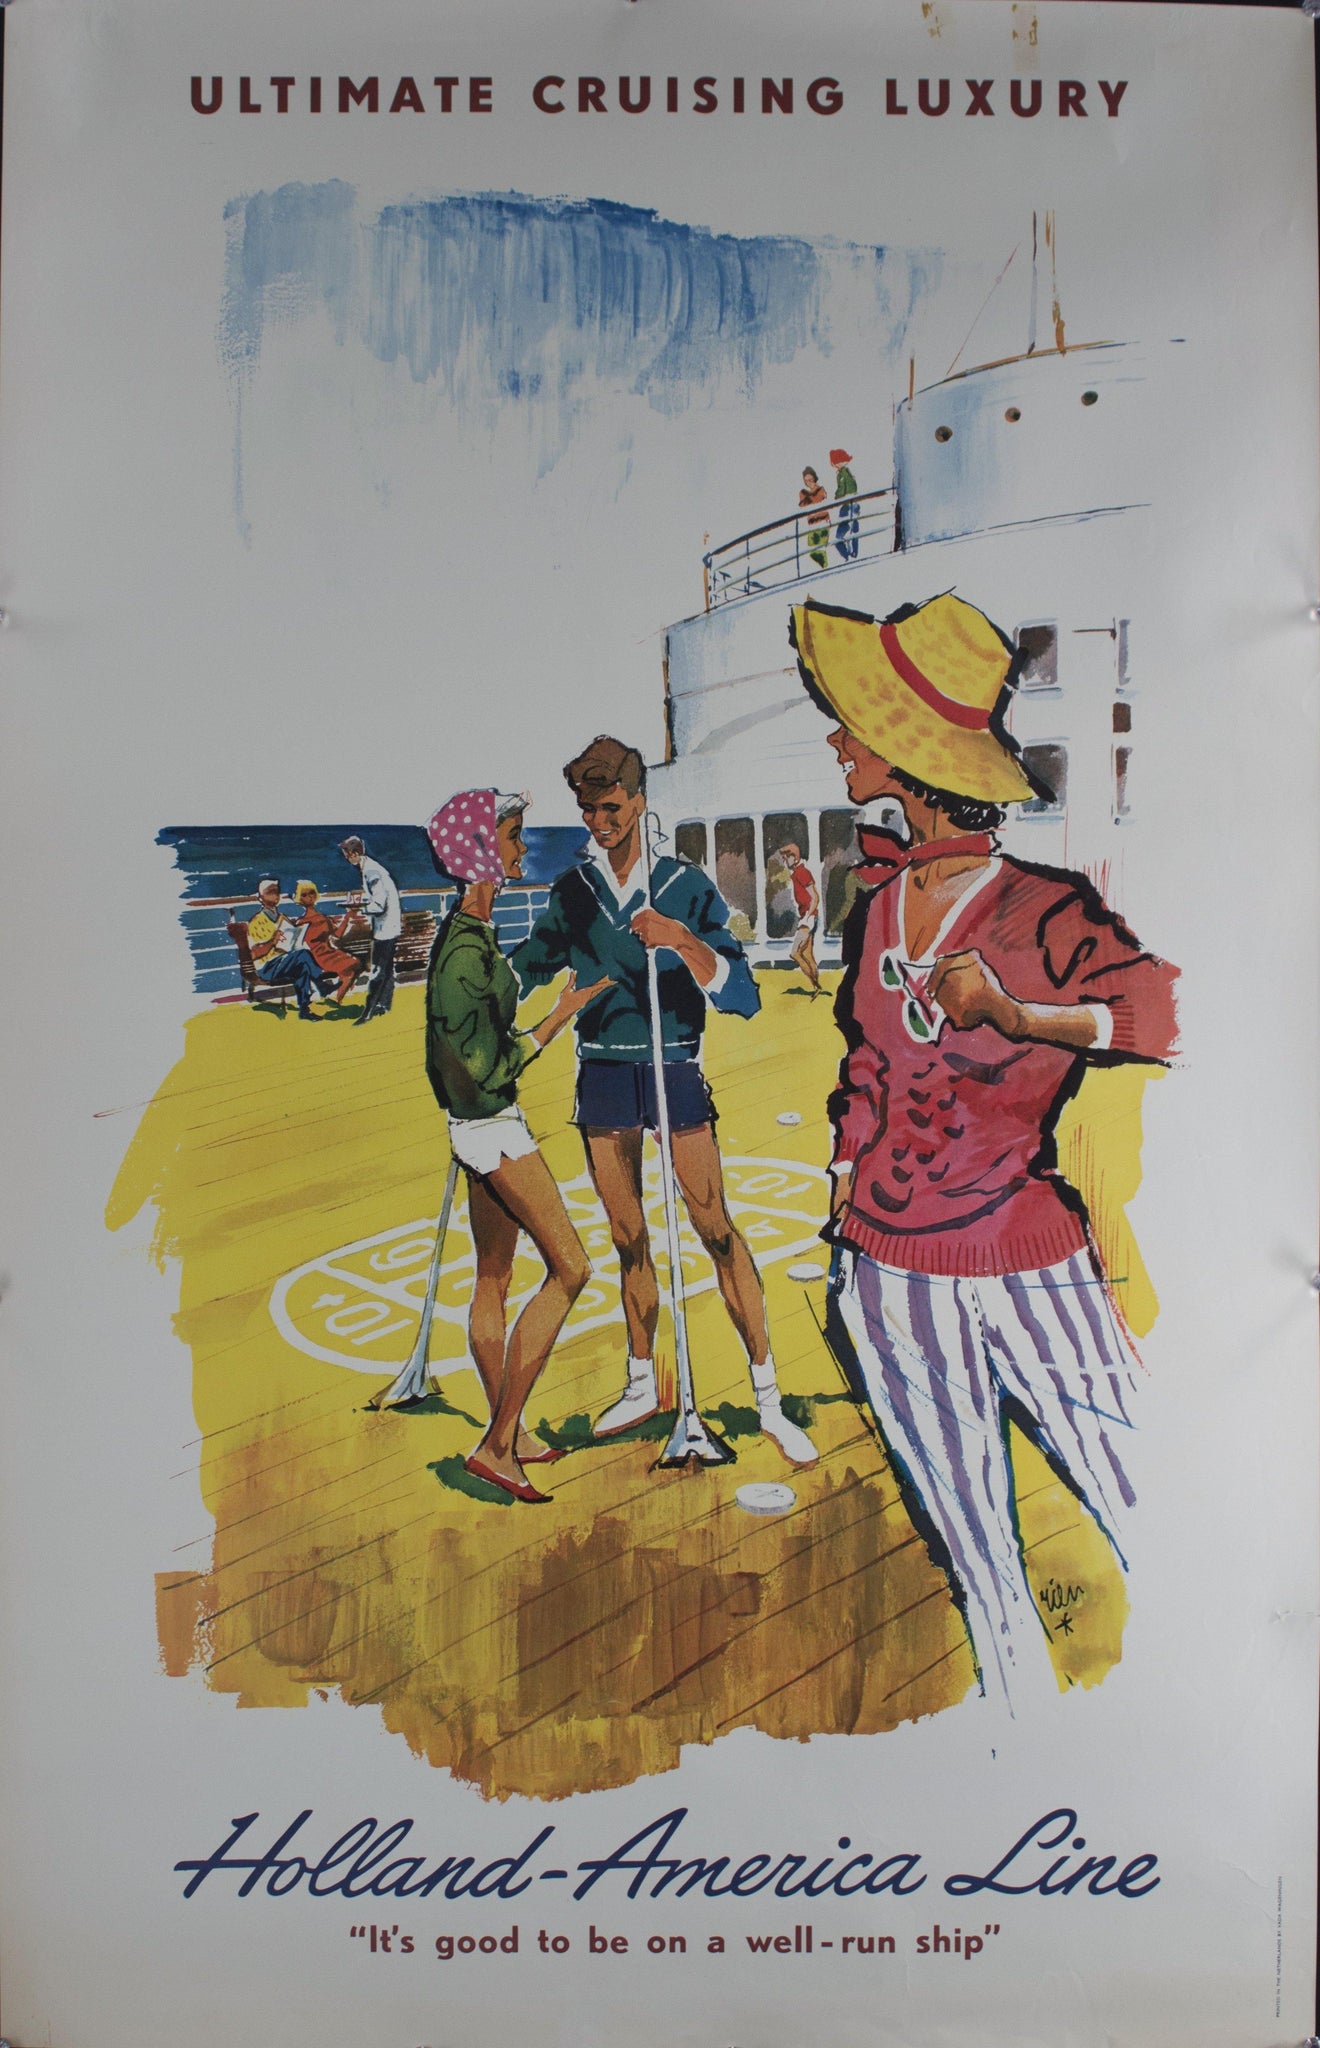 1960 Ultimate Cruising Luxury | Holland-America Line | It's good to be on a well-run ship - Golden Age Posters